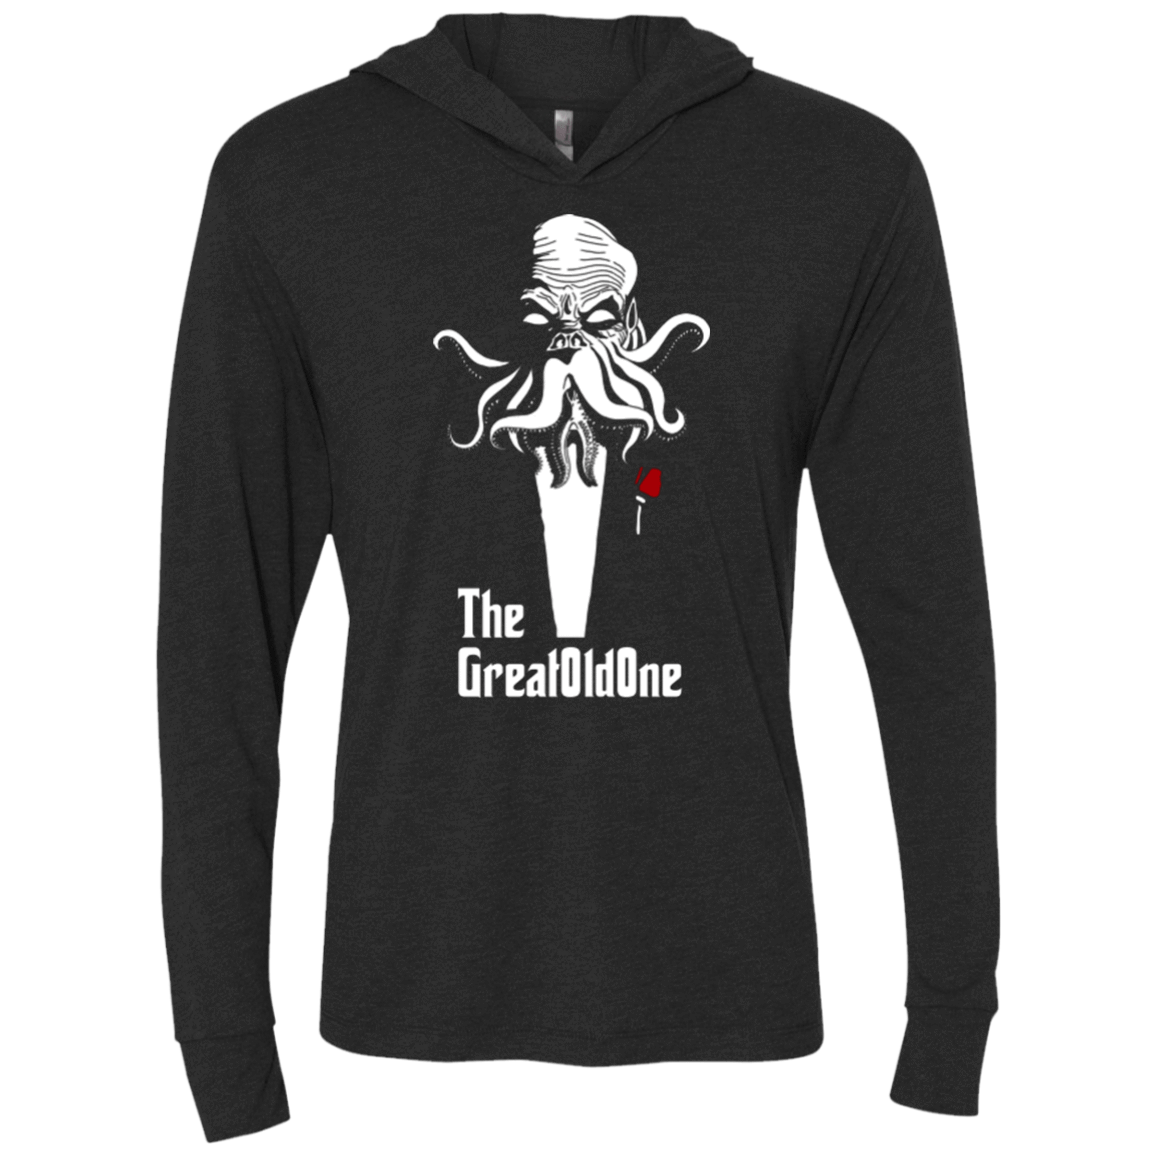 T-Shirts Vintage Black / X-Small The Great Old One Triblend Long Sleeve Hoodie Tee